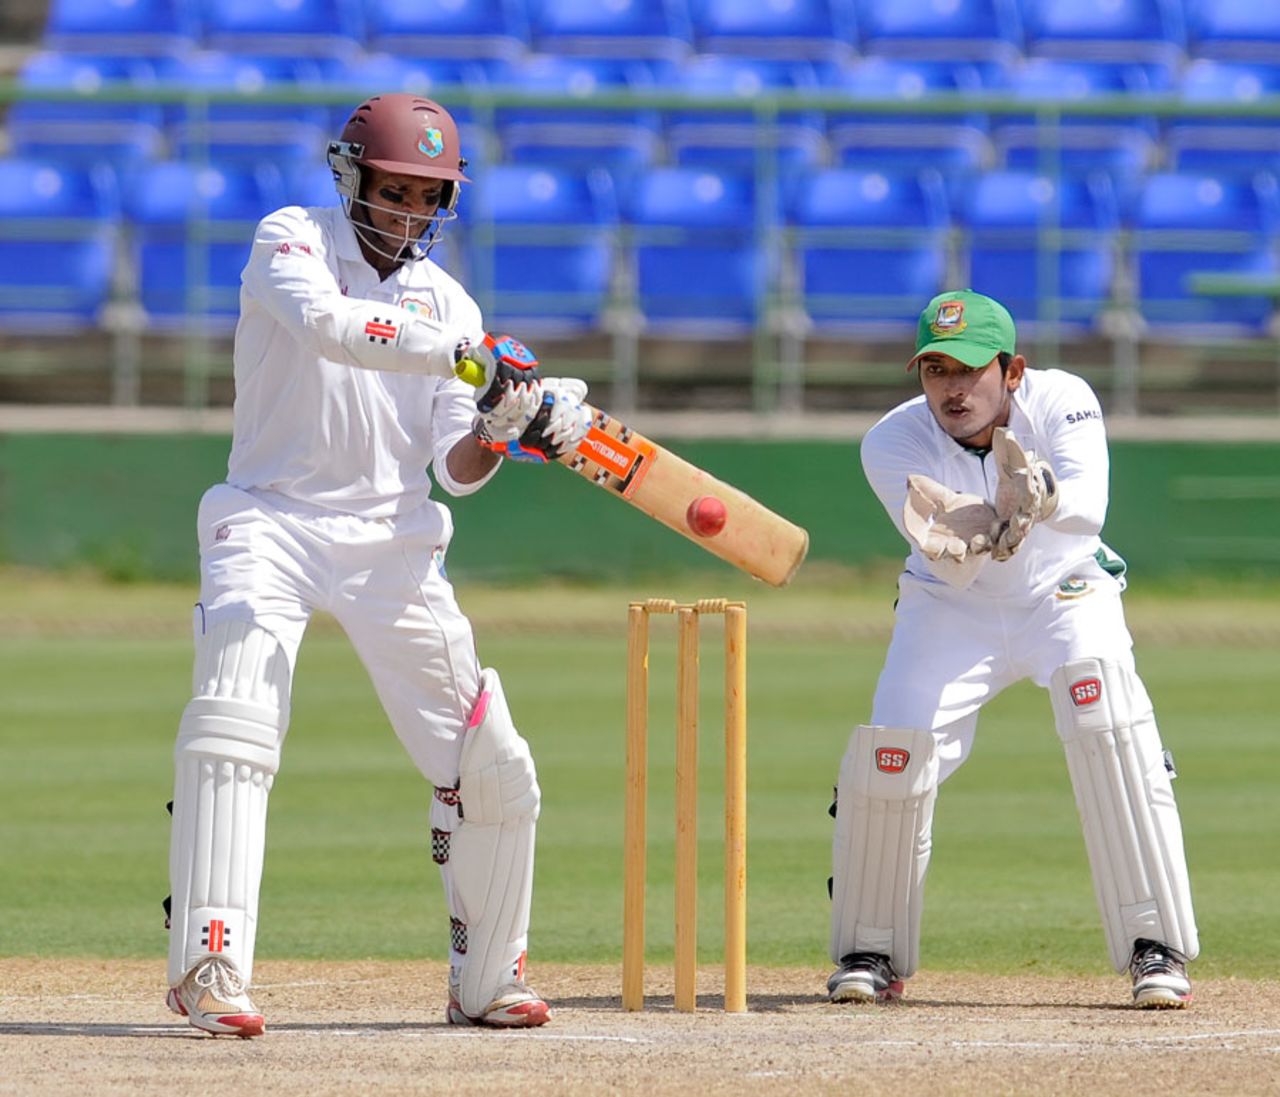 Shivnarine Chanderpaul tucked into another half-century, St Kitts & Nevis v Bangladeshis, tour game, 2nd day, St Kitts, August 31, 2014